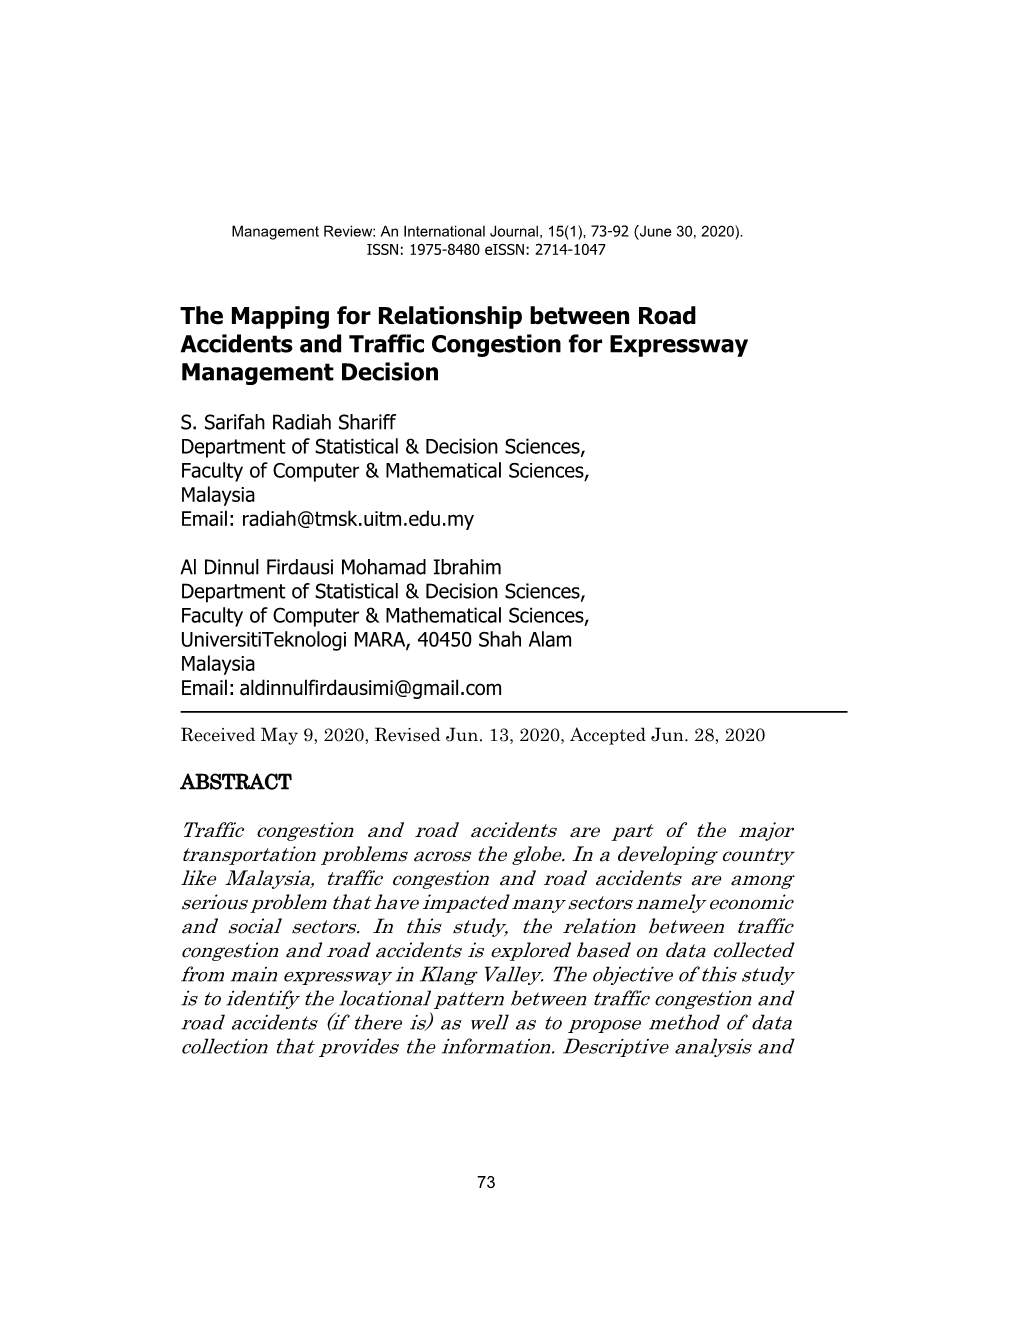 The Mapping for Relationship Between Road Accidents and Traffic Congestion for Expressway Management Decision